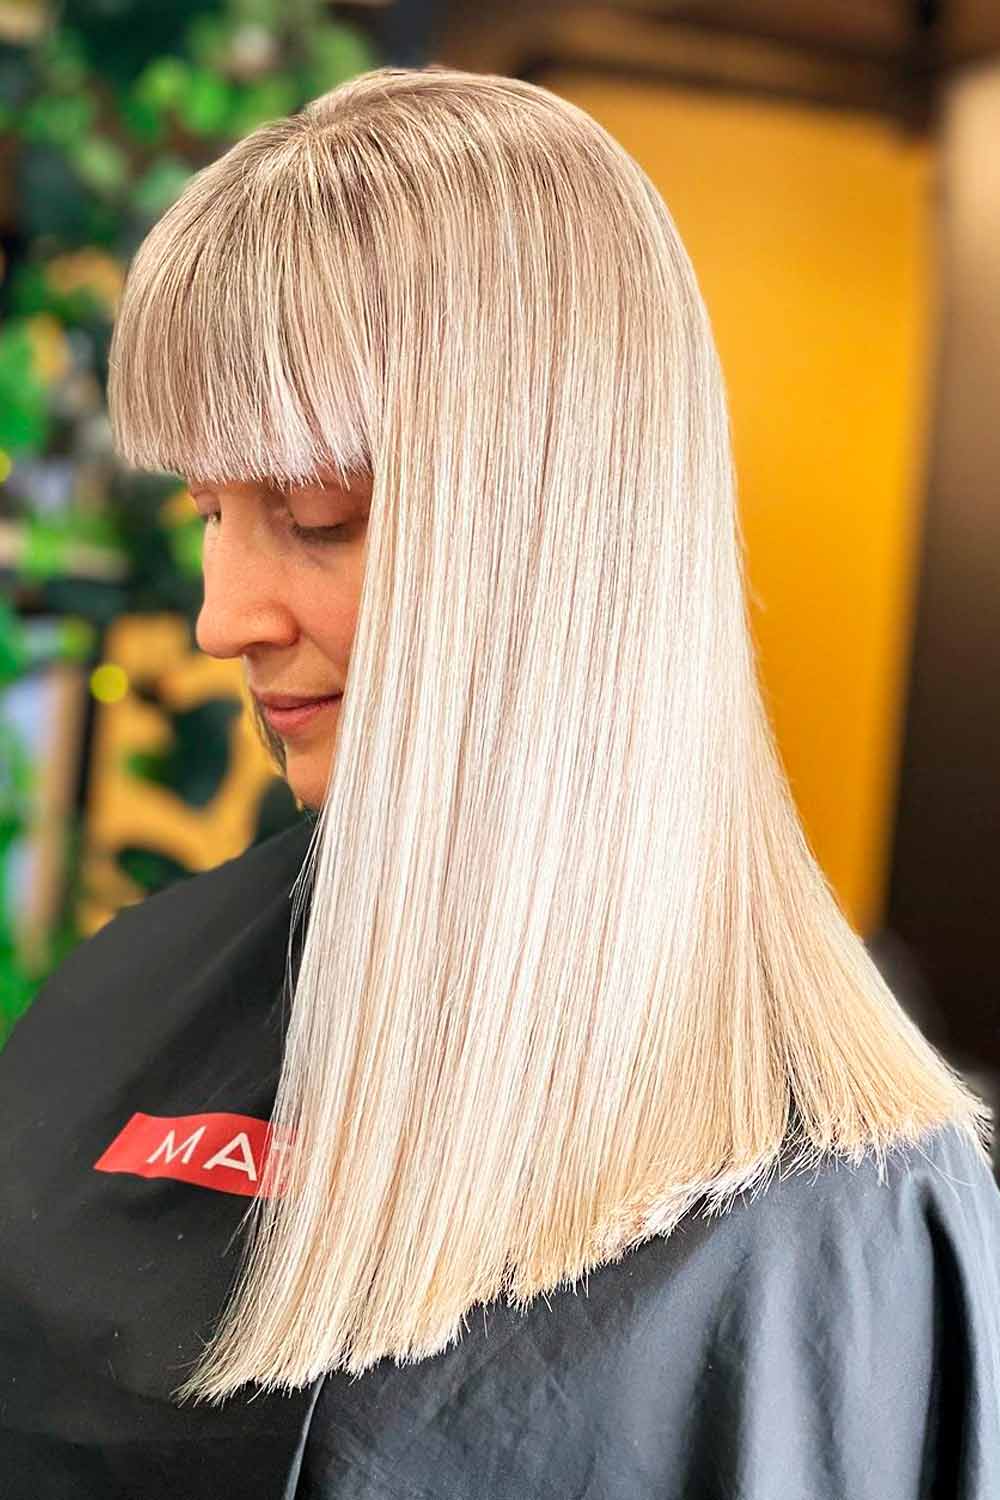 Embellish Your Blonde Straight Hair With Bangs #straighthair #straighthairstyle #straighthairideas